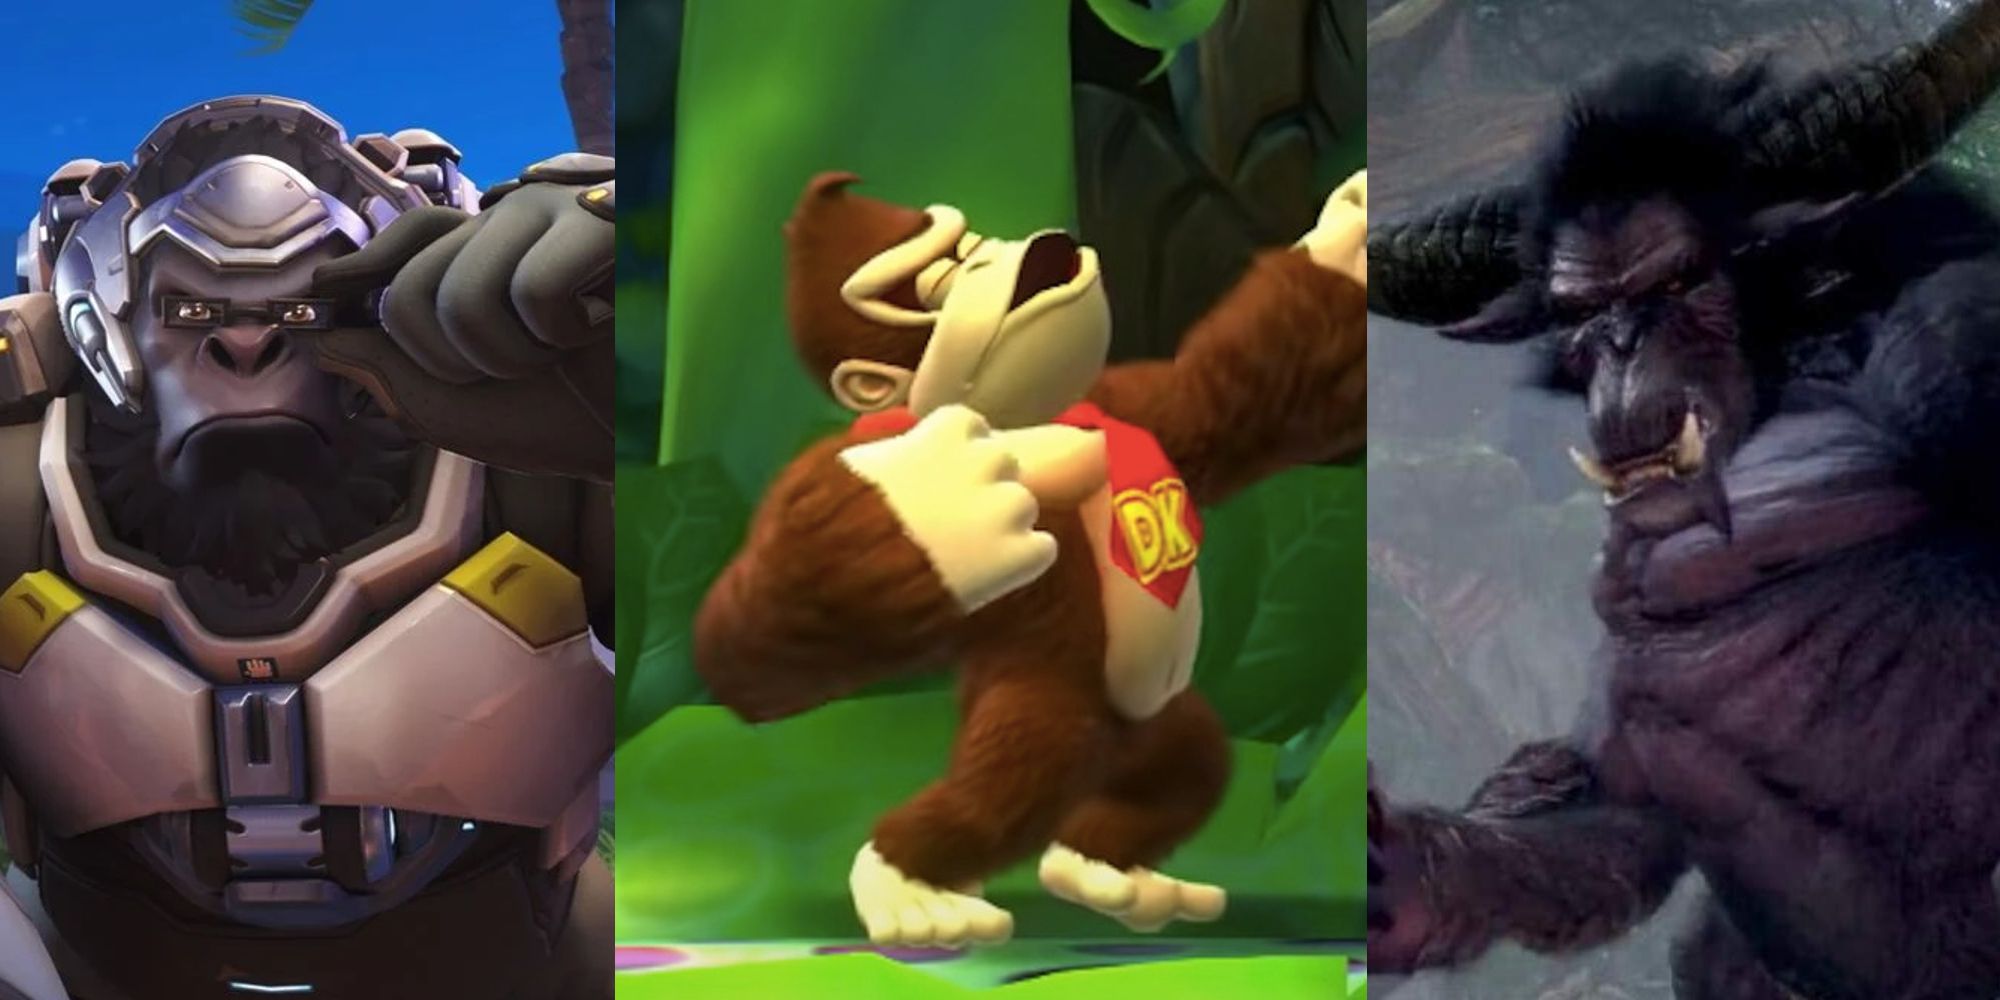 Winston adjusting his glasses in Overwatch; Donkey Kong at a level start in Donkey Kong Country Returns; a tame Rajang in Monster Hunter World